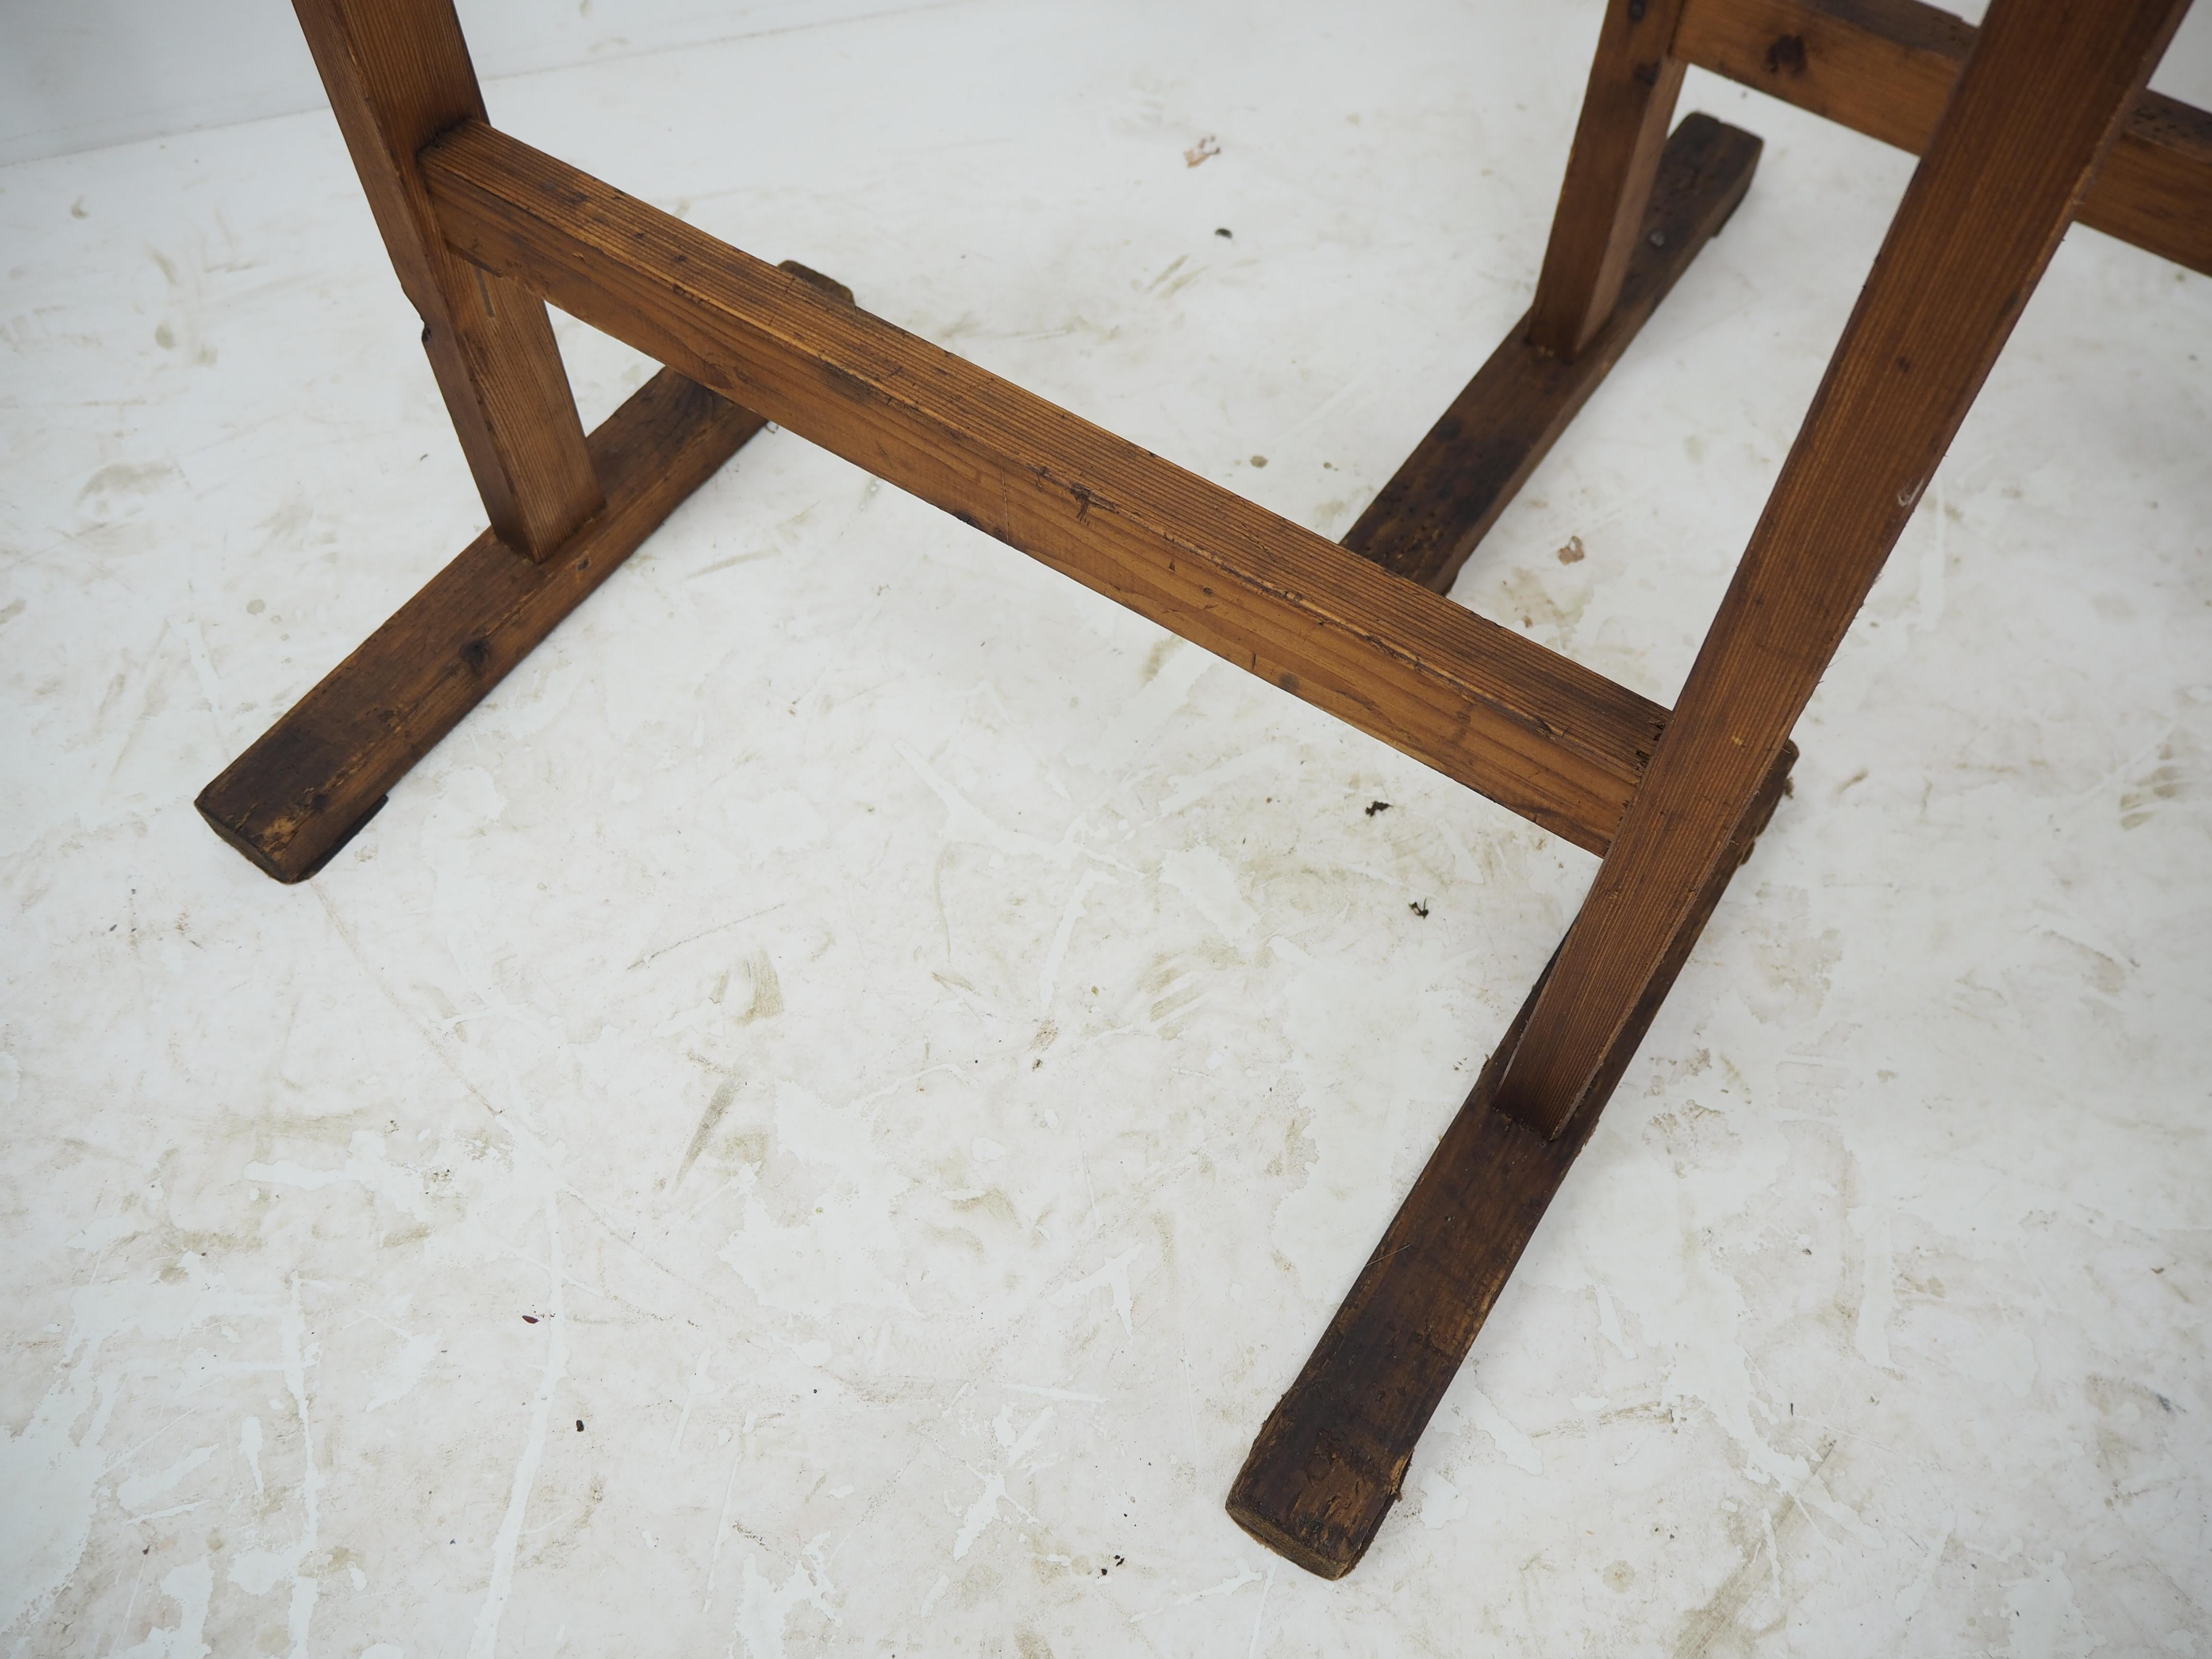 Pair of Industrial Wood Trestle Table Bases, Early 20th Century For Sale 7